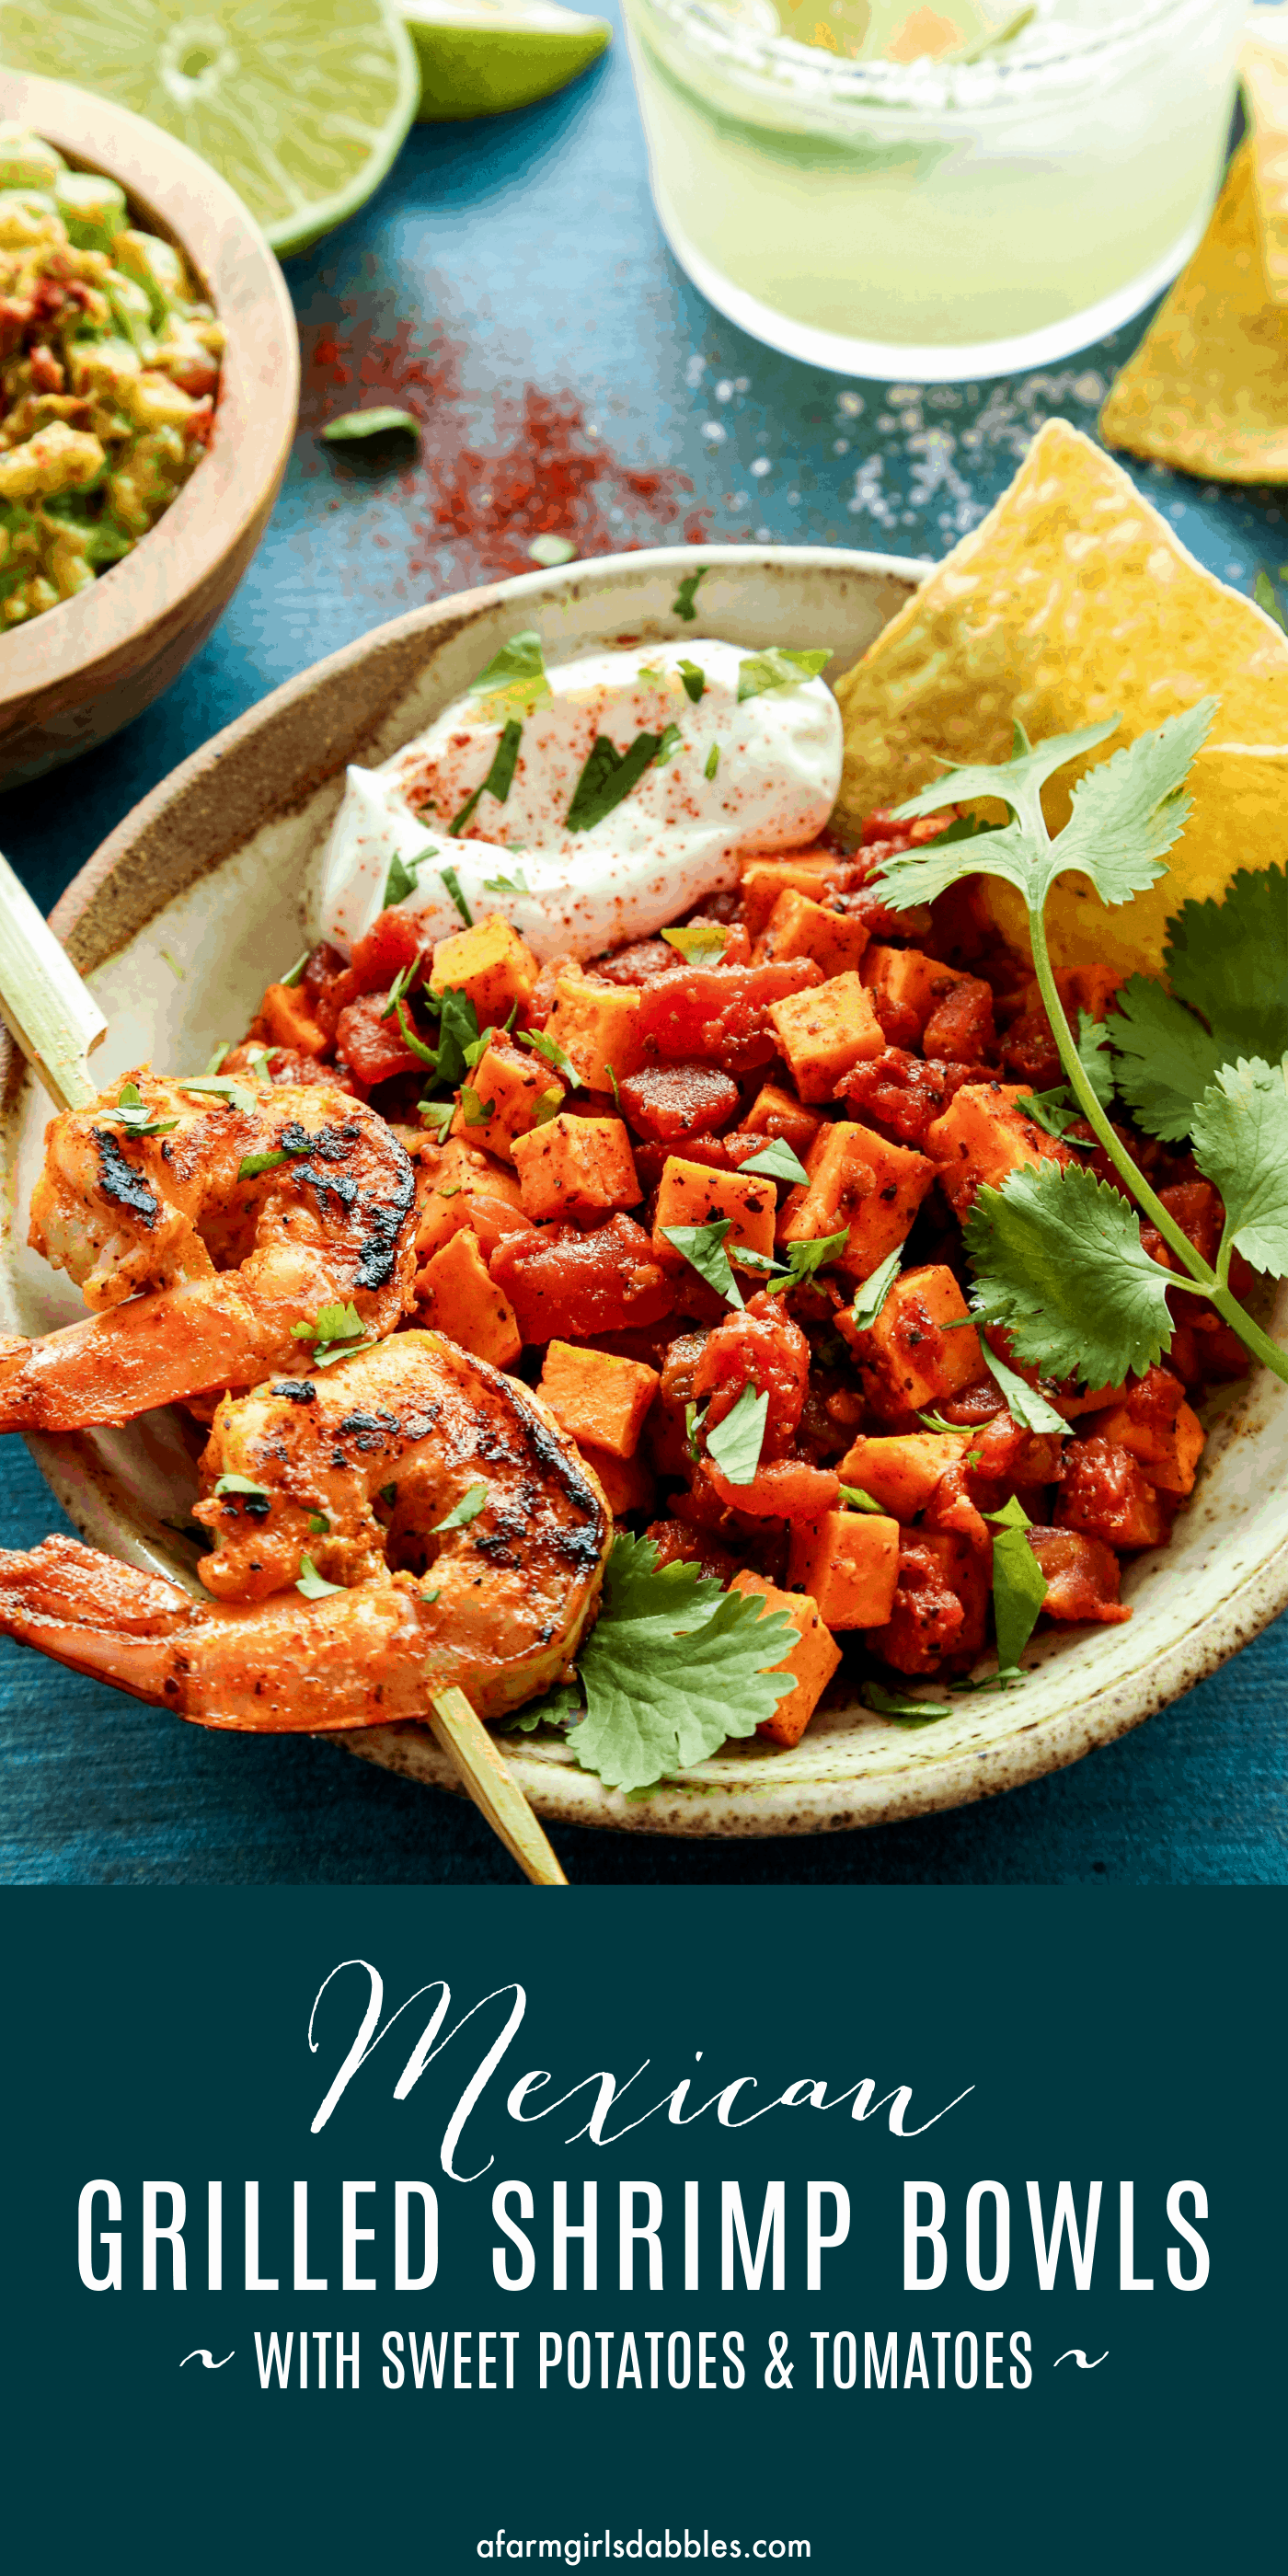 Pinterest image for Mexican grilled shrimp bowls with sweet potatoes and tomatoes